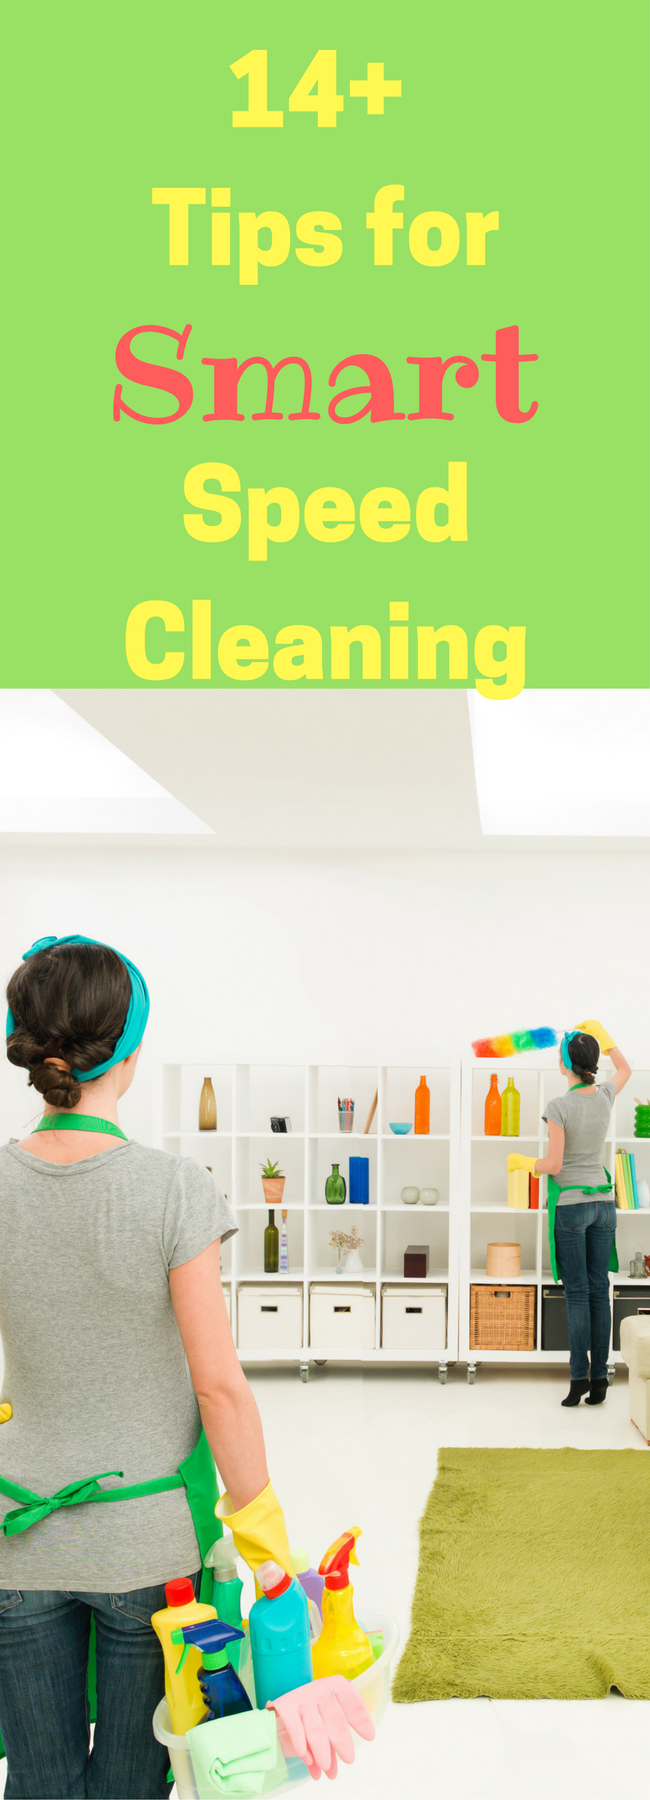 Cleaning Tips / Speed Cleaning / Cleaning Hacks / cleaning and organizing / cleaning and organization tips & tricks / household cleaning